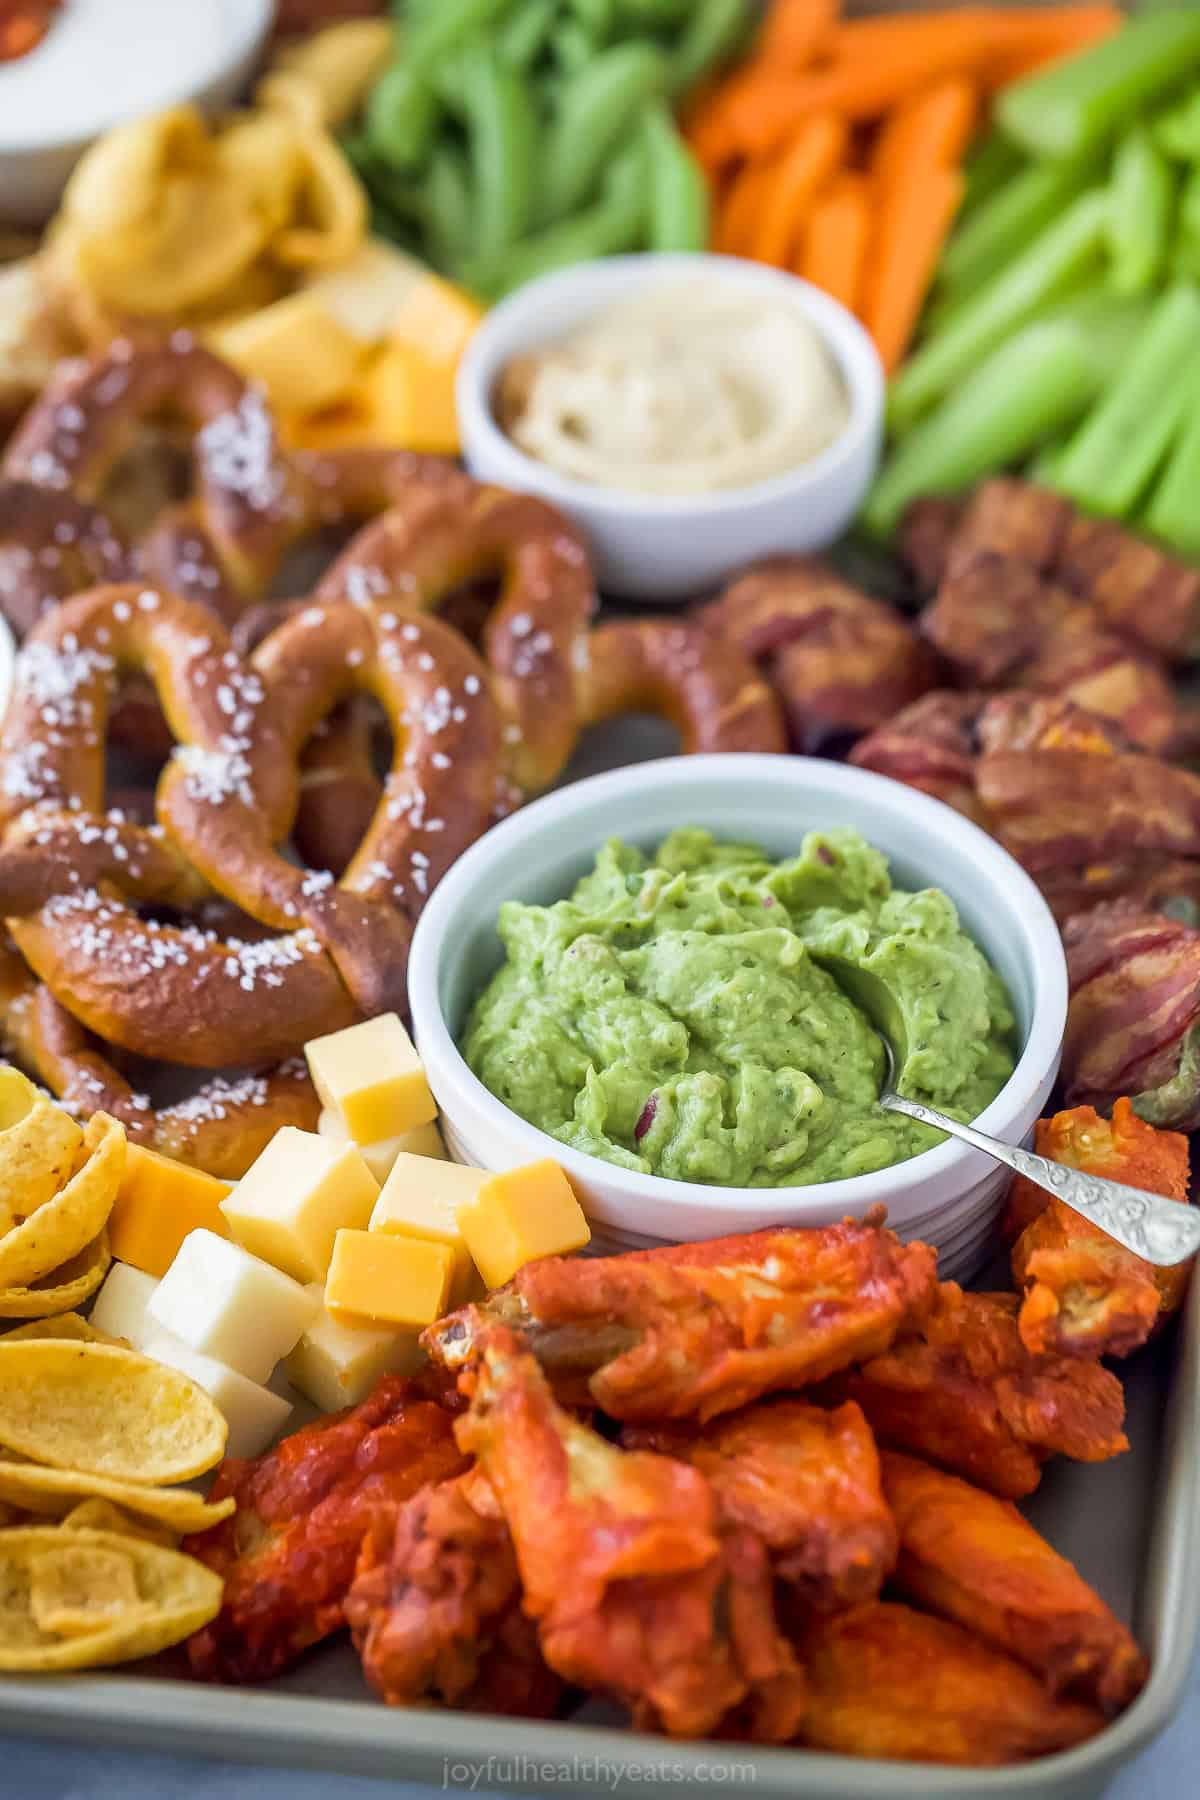 an assortment of snacks including a small bowl of guacamole, pretzels, cheese cubes, and chicken wings